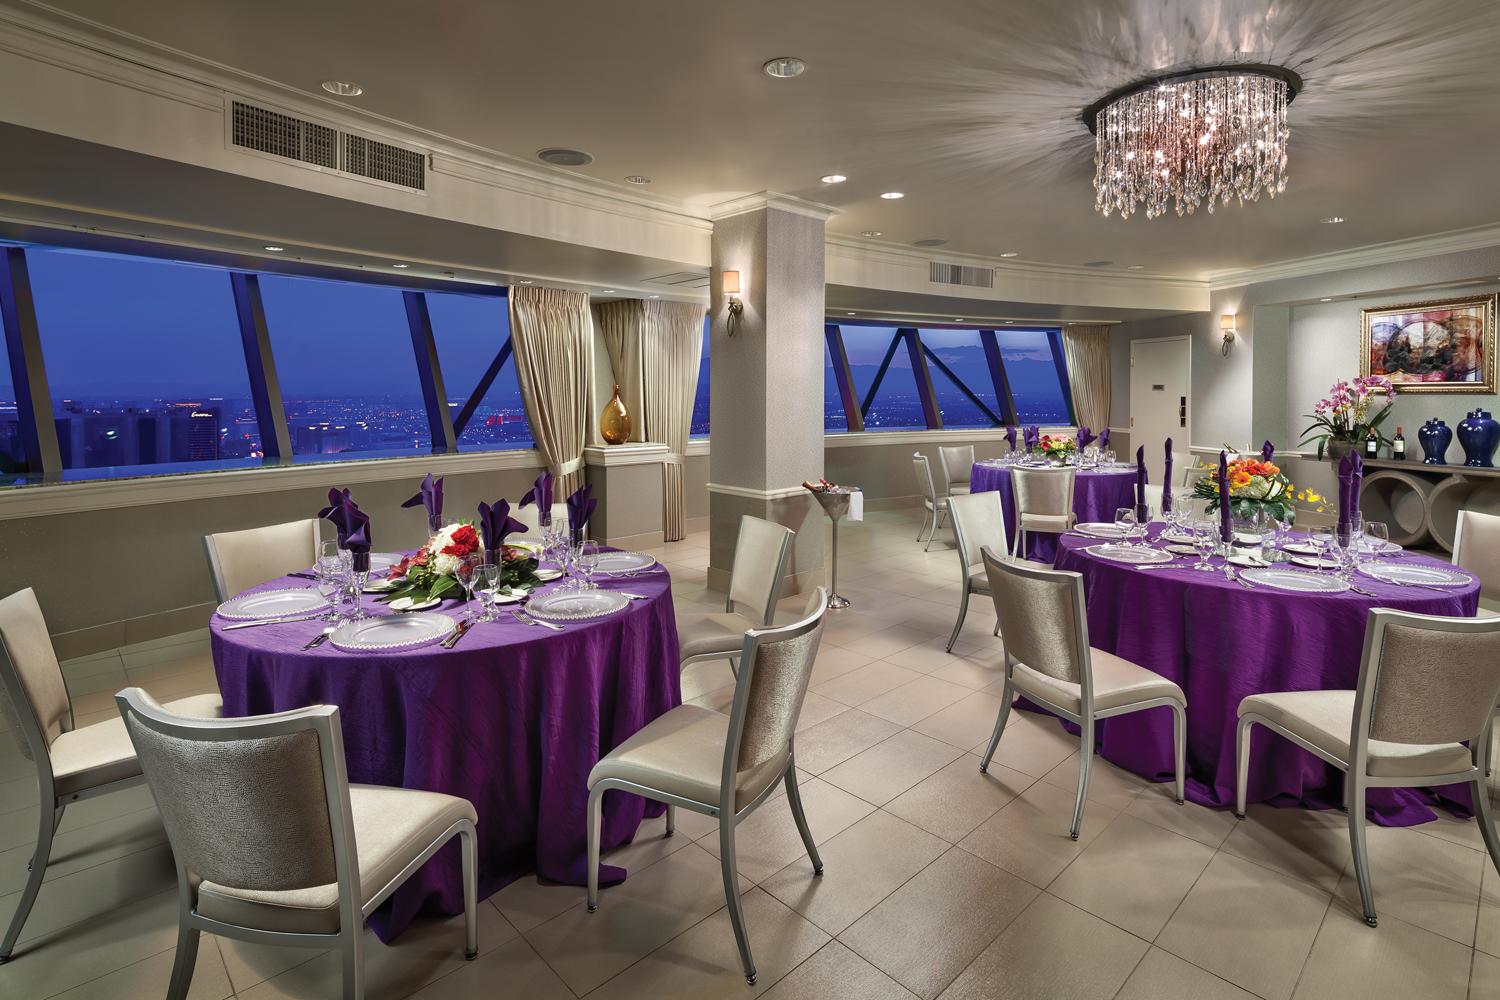 The STRAT Renaissance room in the Tower with white tiles and a chandelier and tables with purple tablecloths set with dinnerware overlooking a view of the Las Vegas valley